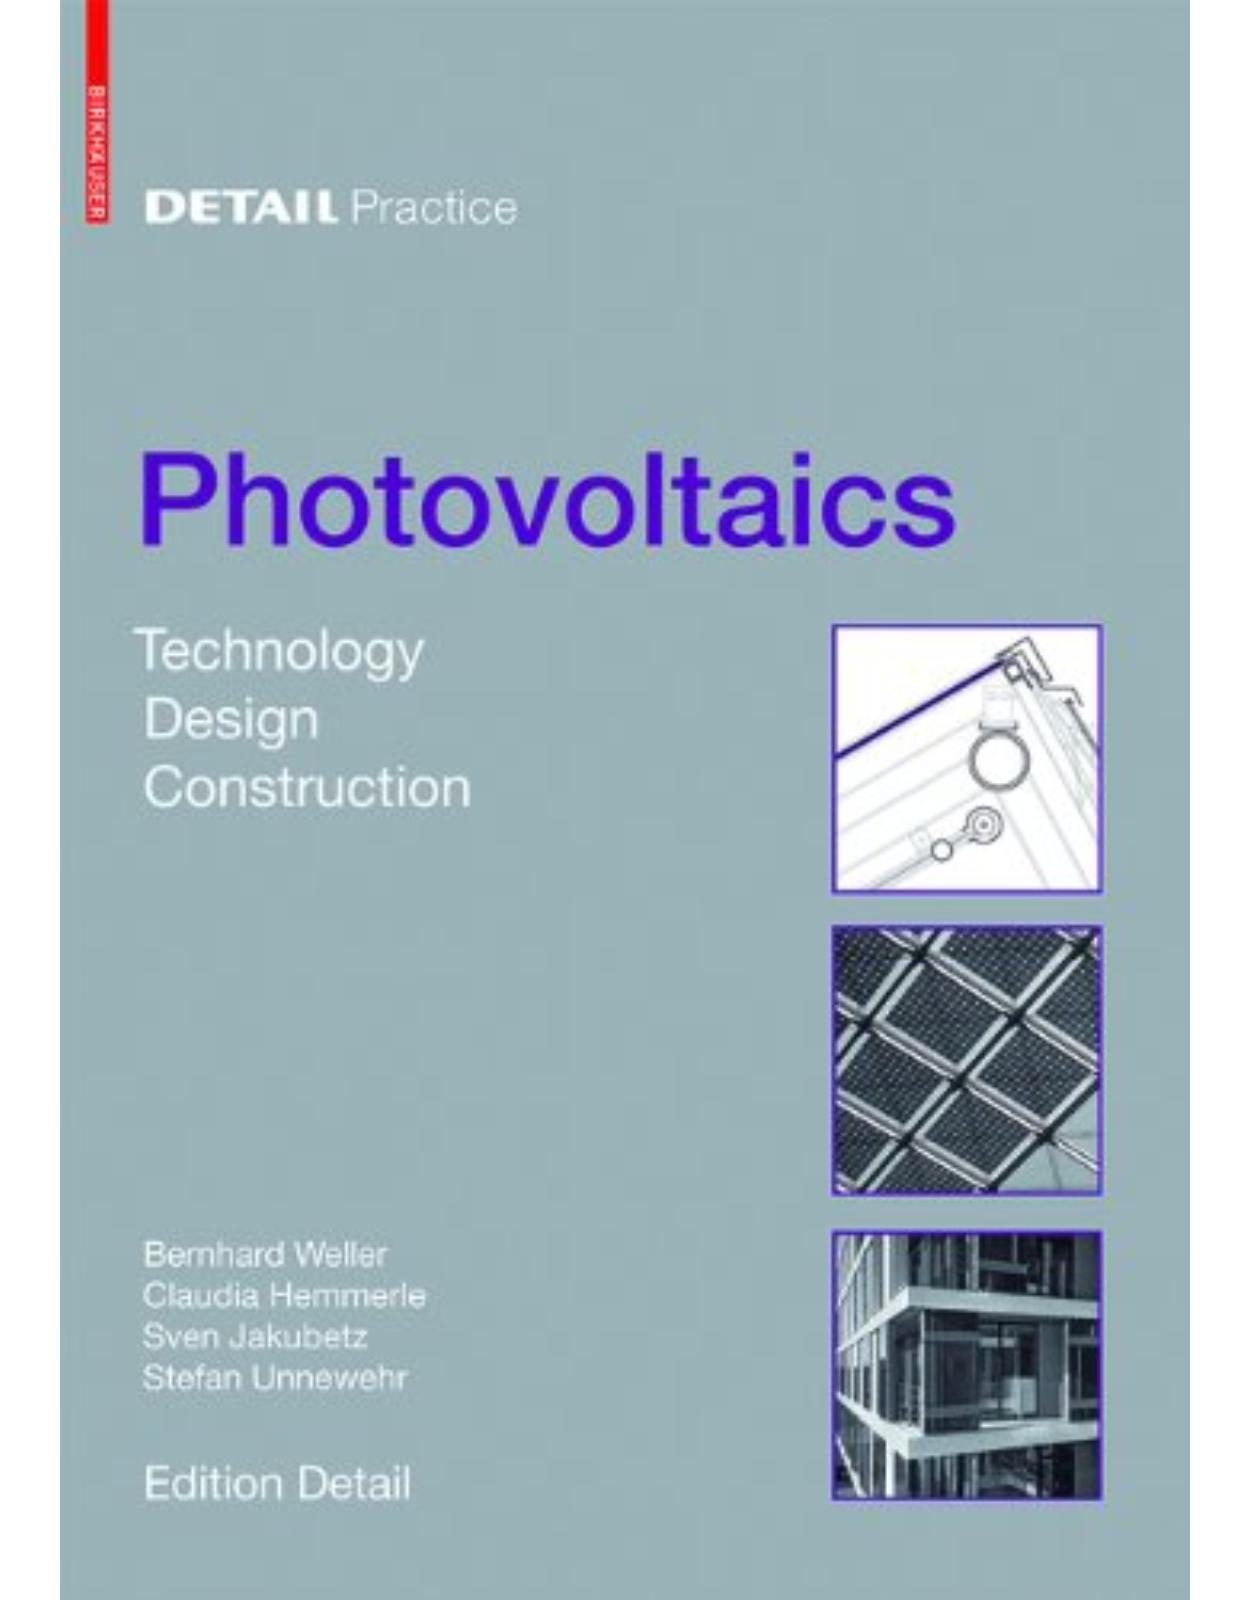 Detail Practice: Photovoltaics: Technology, Architecture, Installation